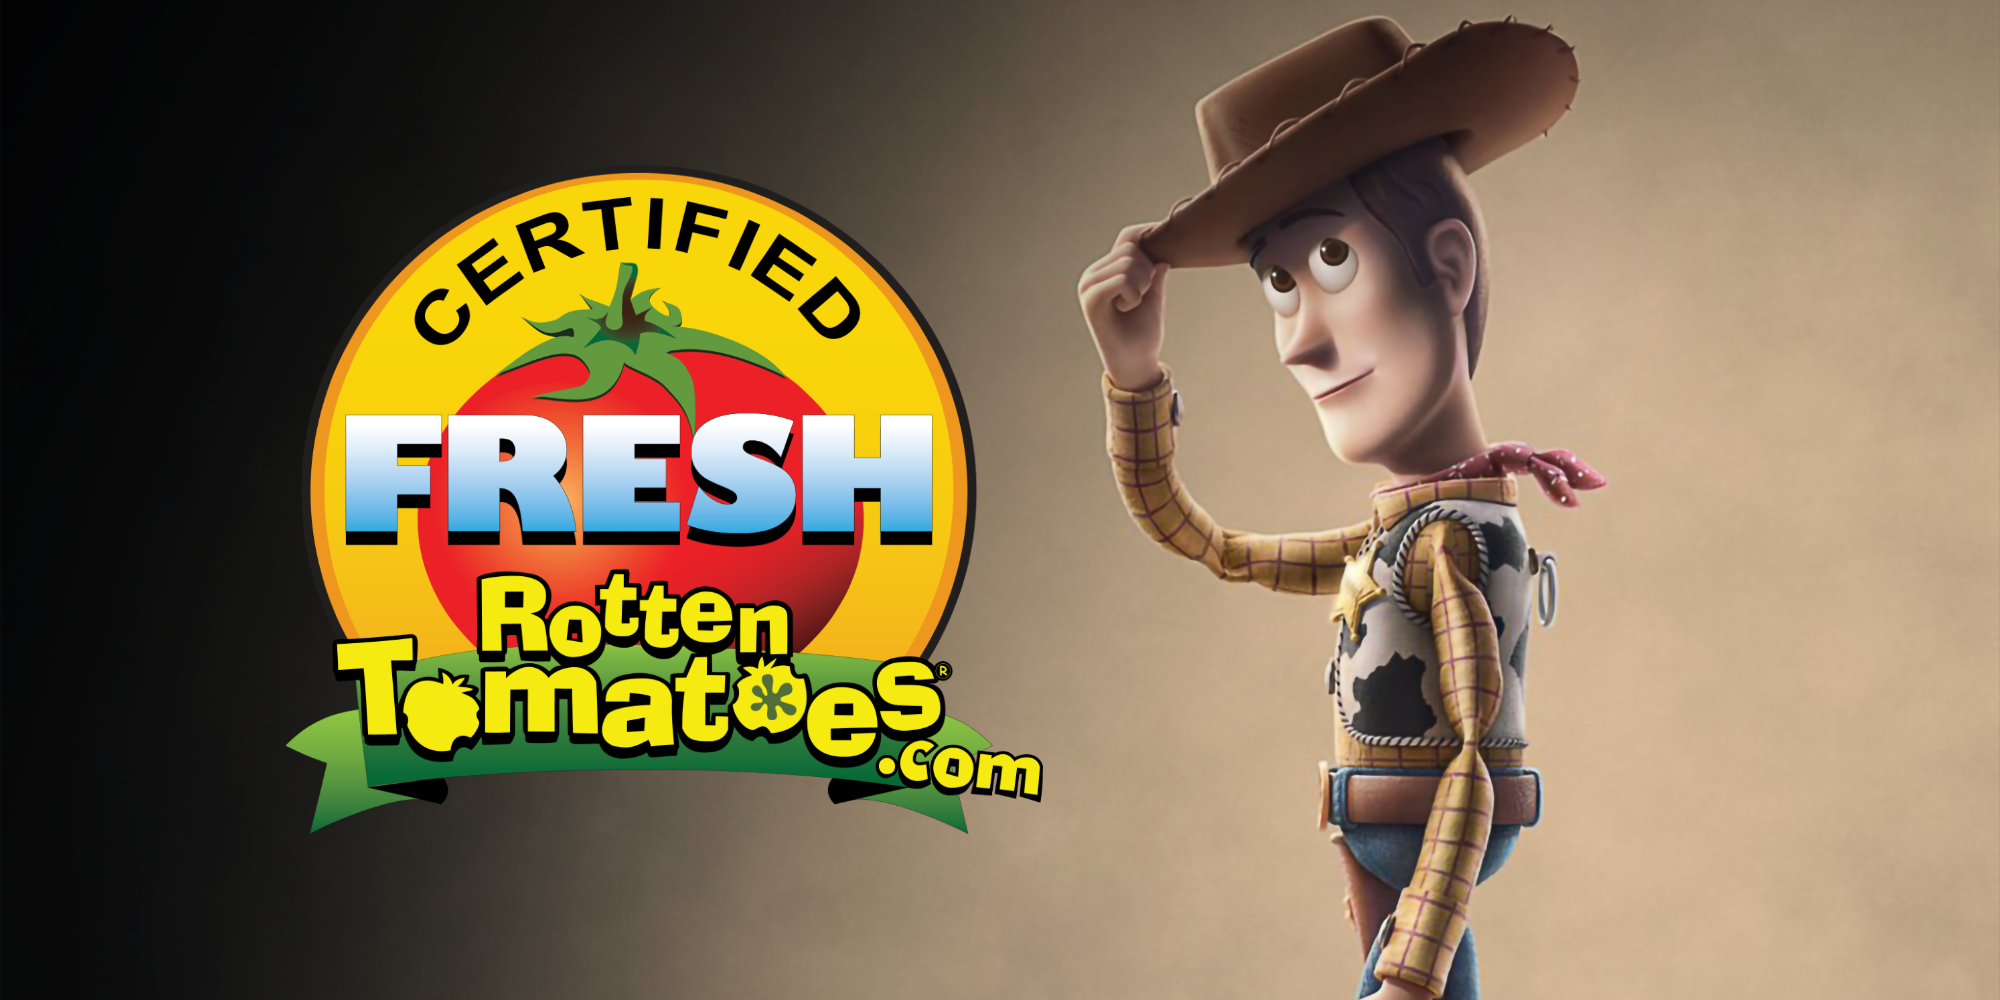 Toy Story 4 Certified Fresh on Rotten Tomatoes